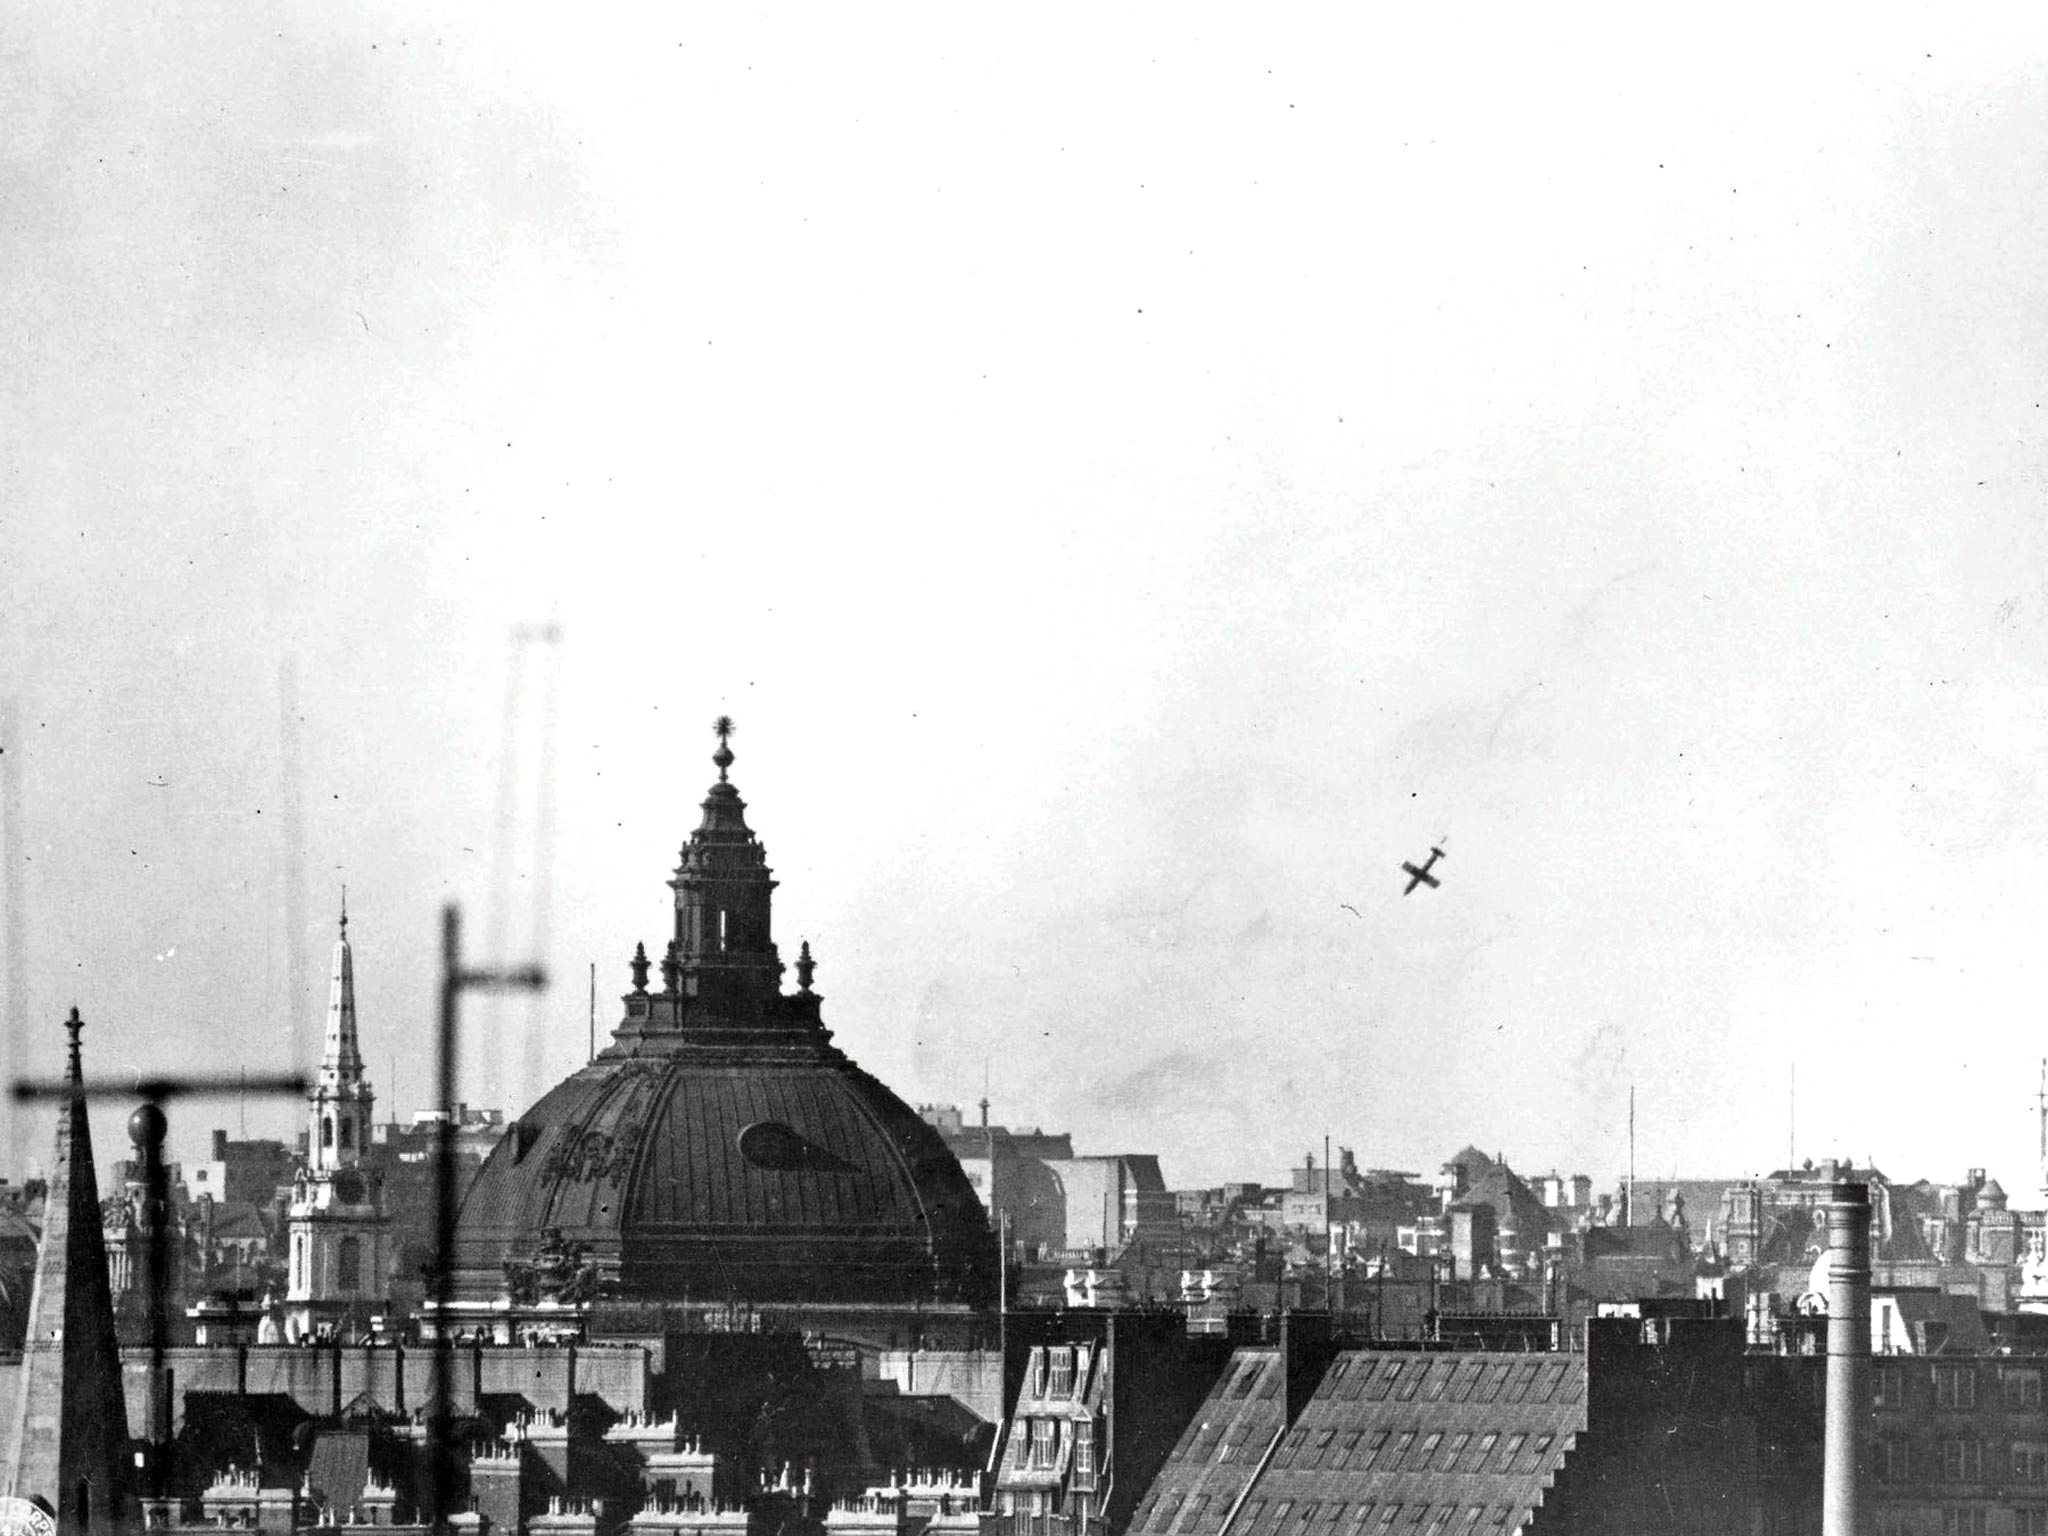 A V-1 buzz bomb falling into the Covent Garden area of London, England, United Kingdom, 14 Jun 1944, the second day of the V-1 assault on London.